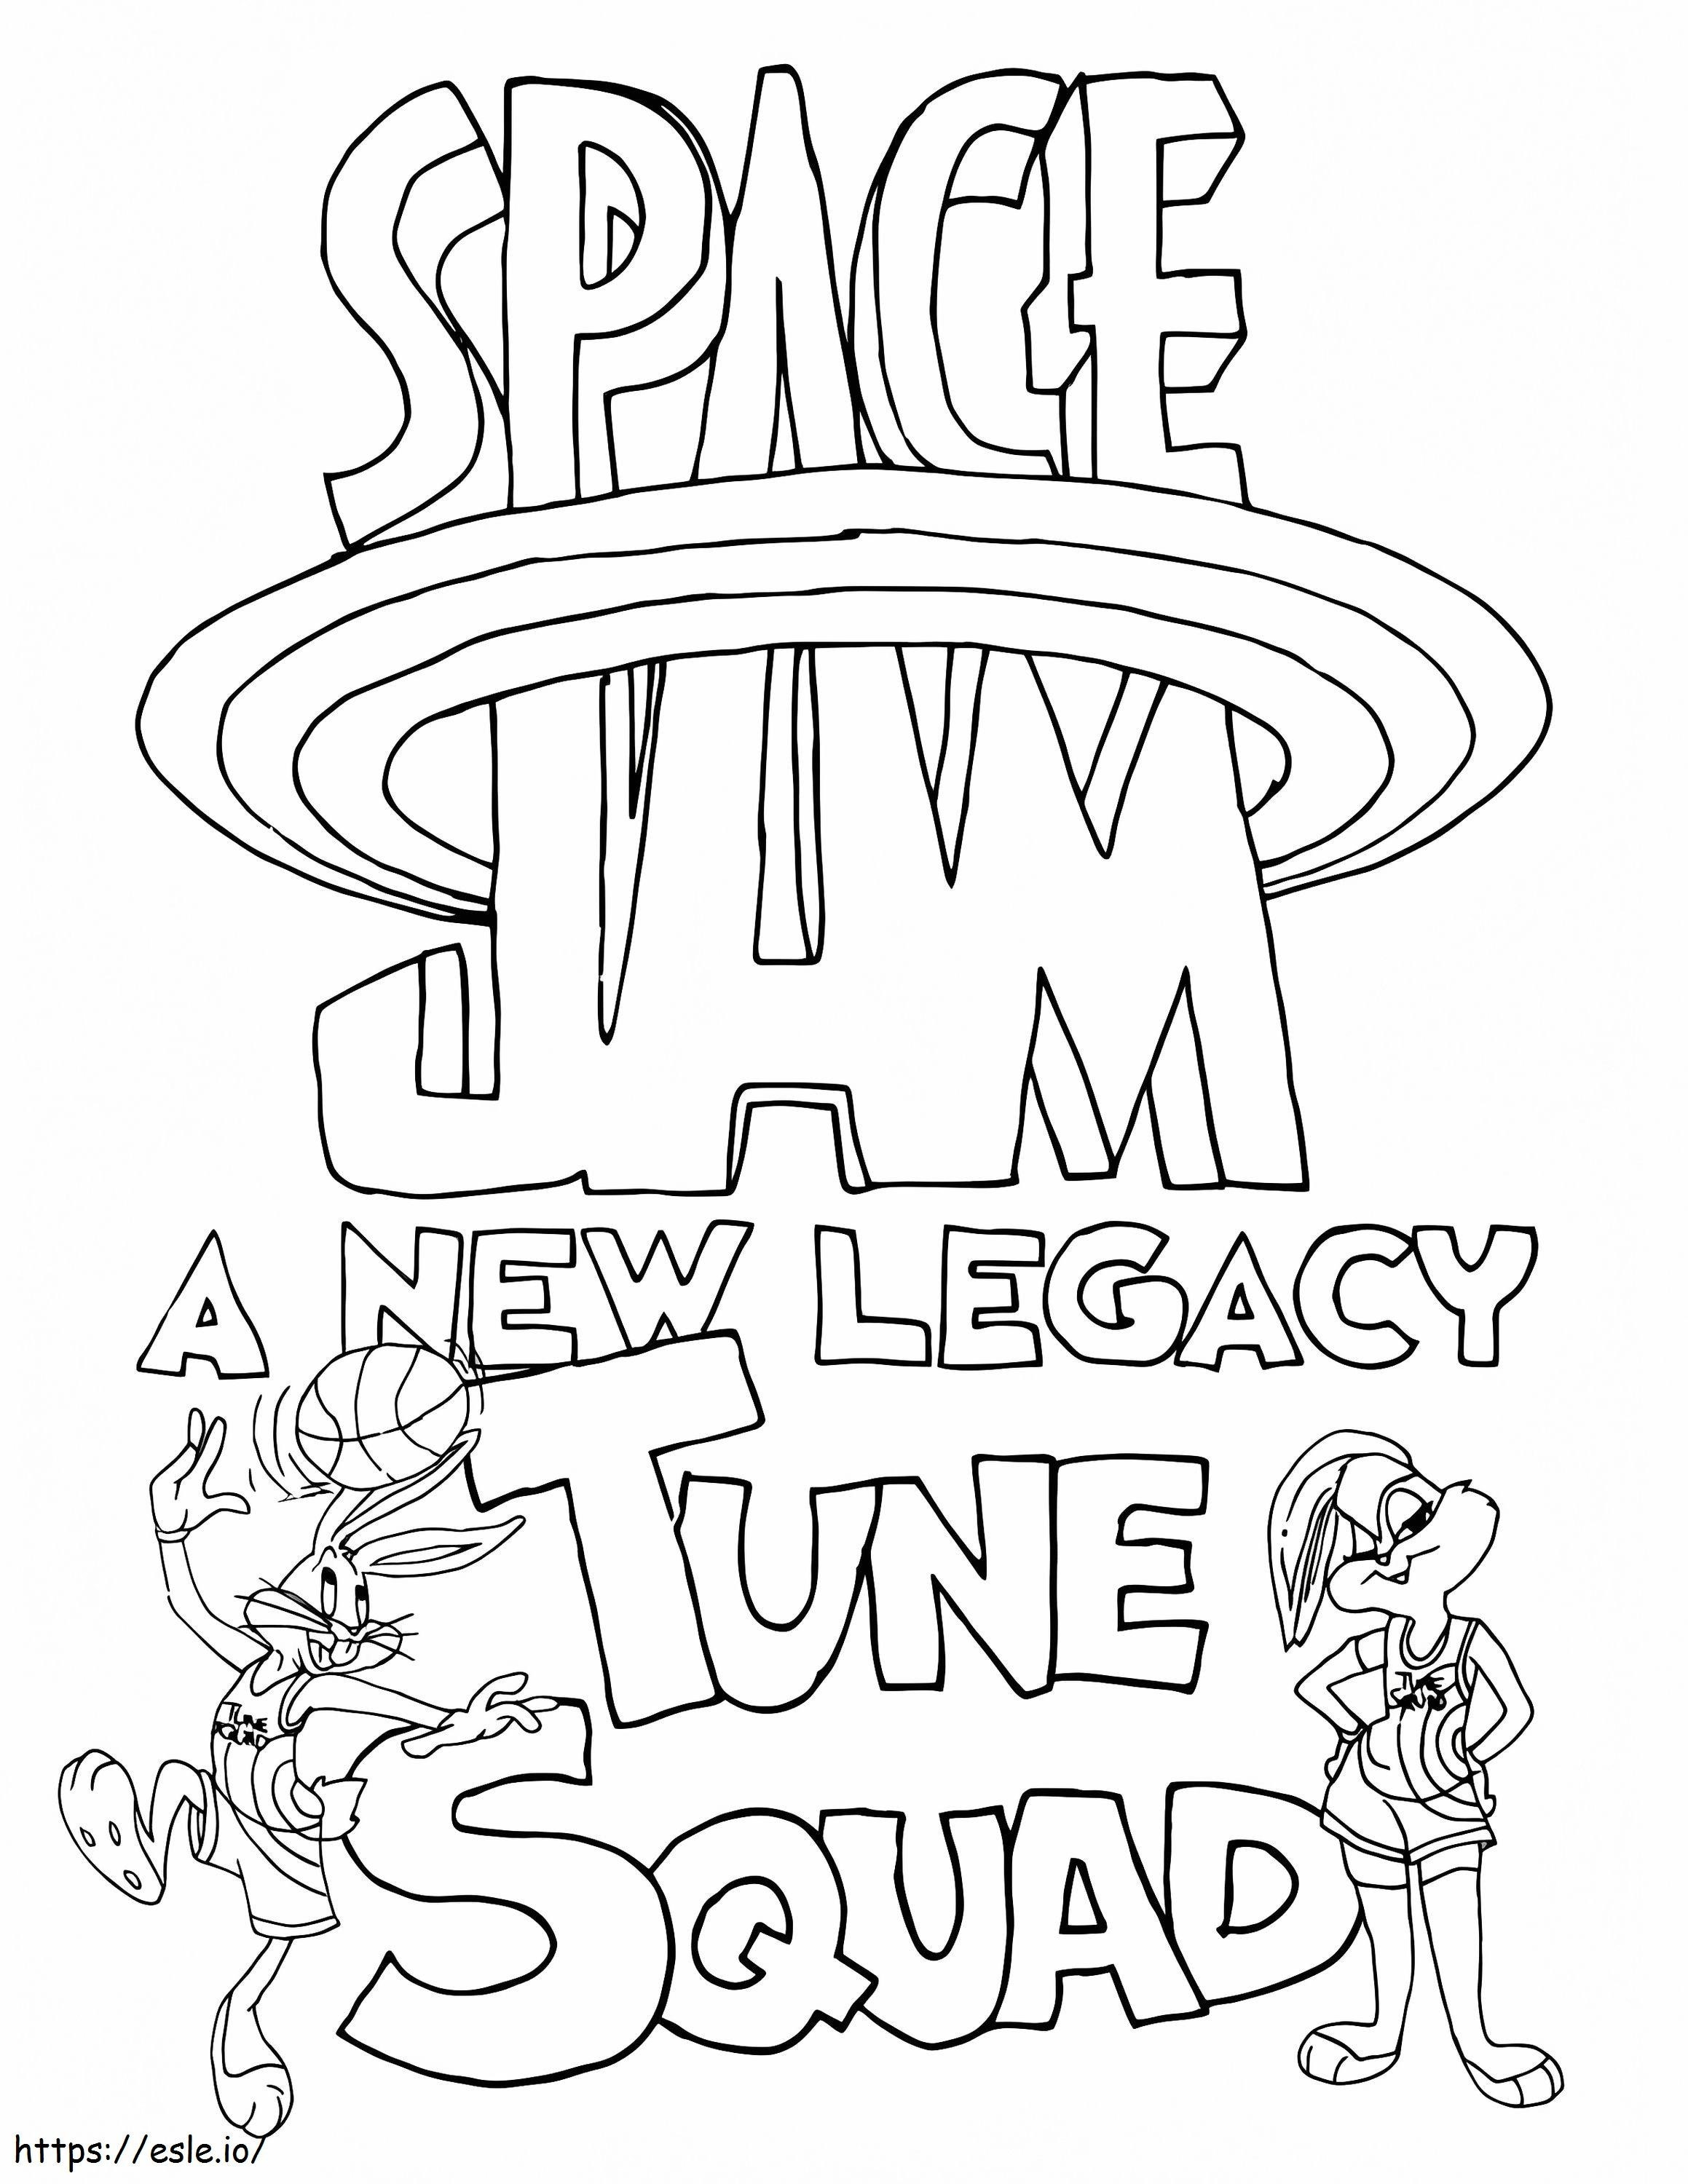 Poster Space Jam A New Legacy coloring page